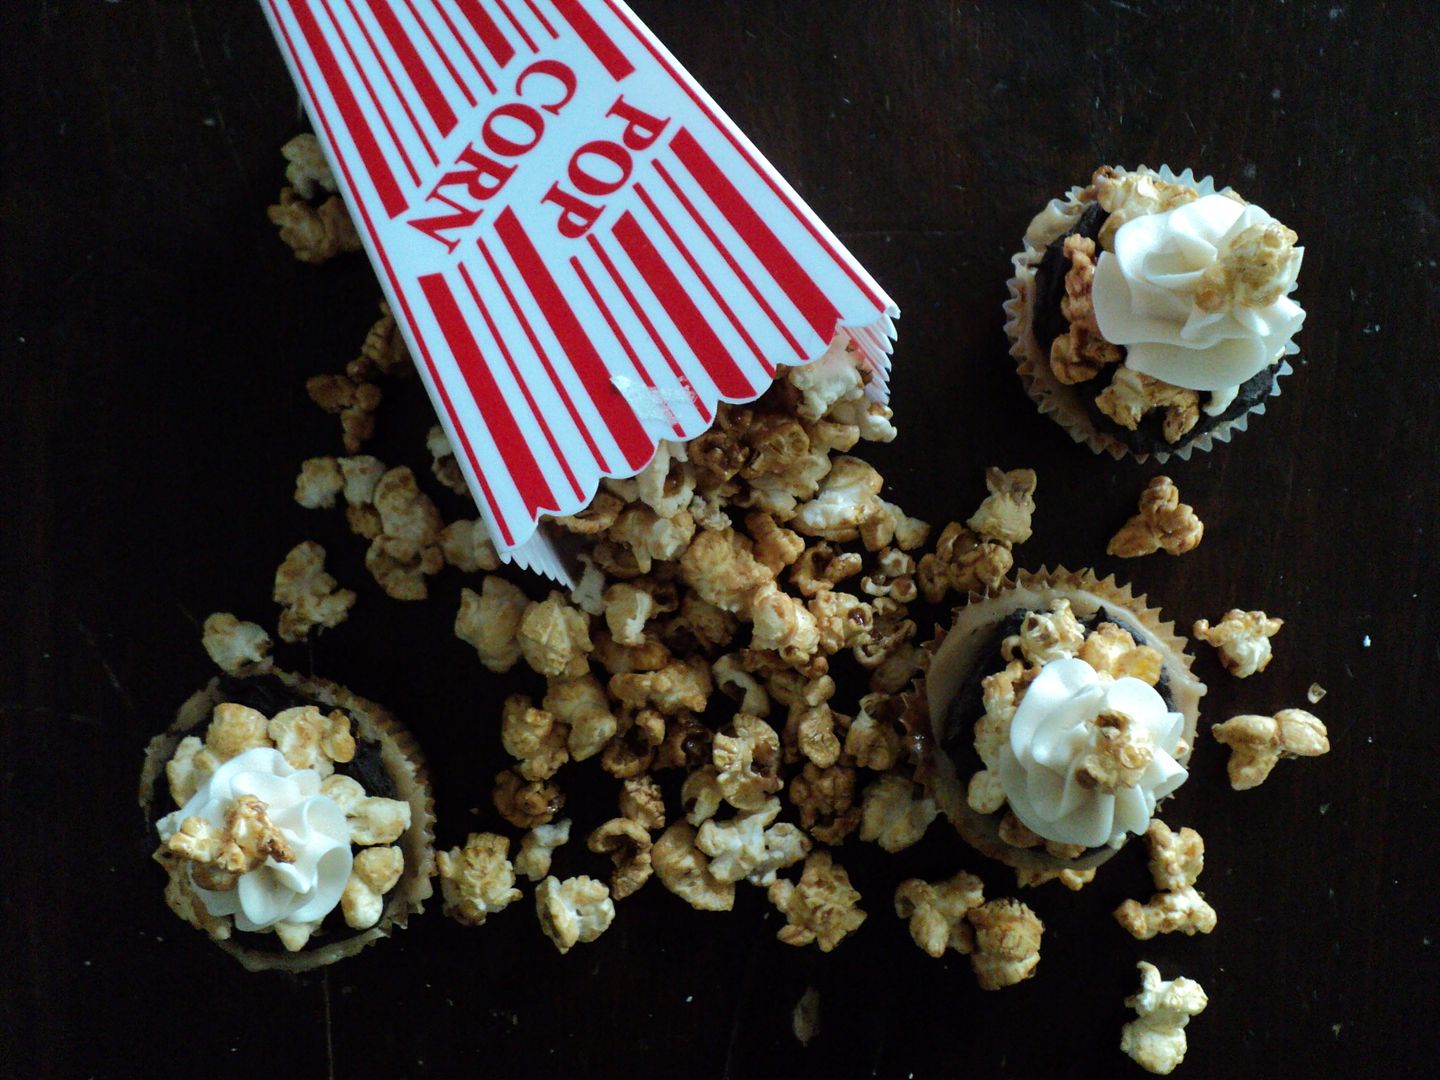 leaves and flours vegan caramel corn snack attack cupcakes